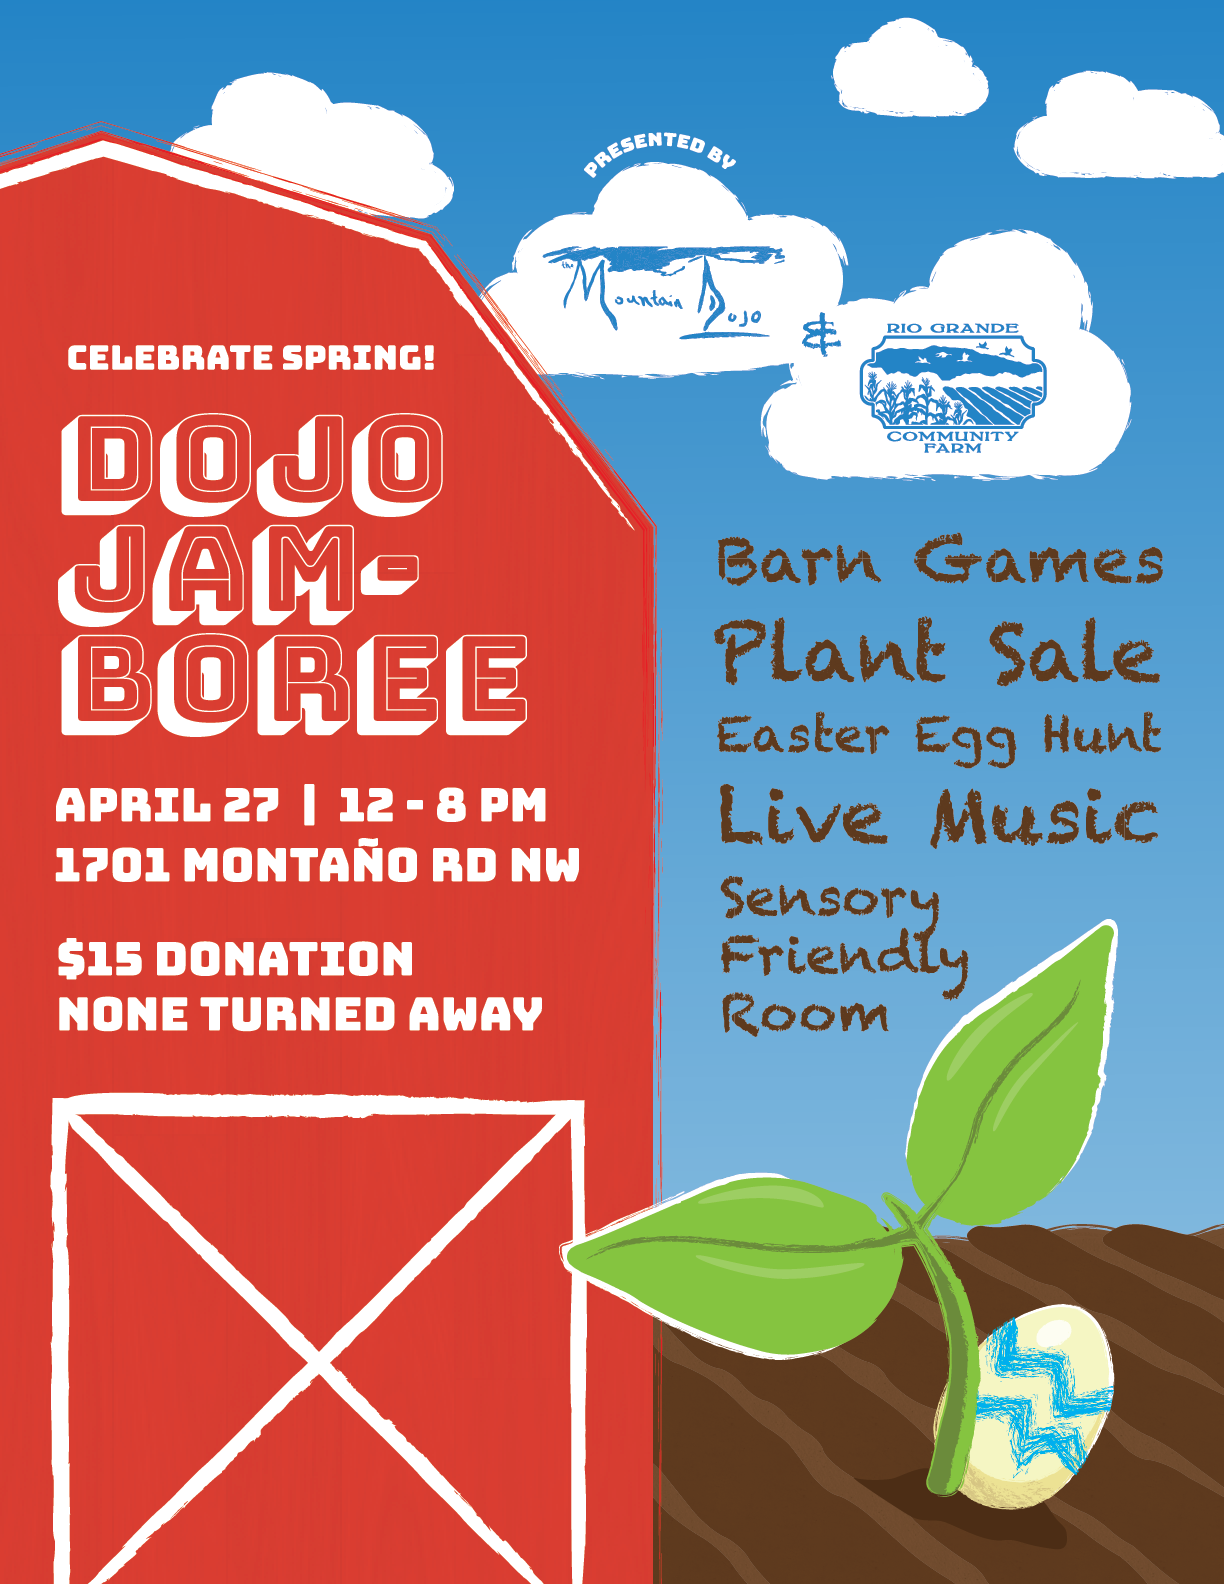 Dojo Jamboree, April 27th, 12-8pm $15 donation requested, none turned away. Barn games, plant sale, easter egg hunt, live music, sensory friendly room.